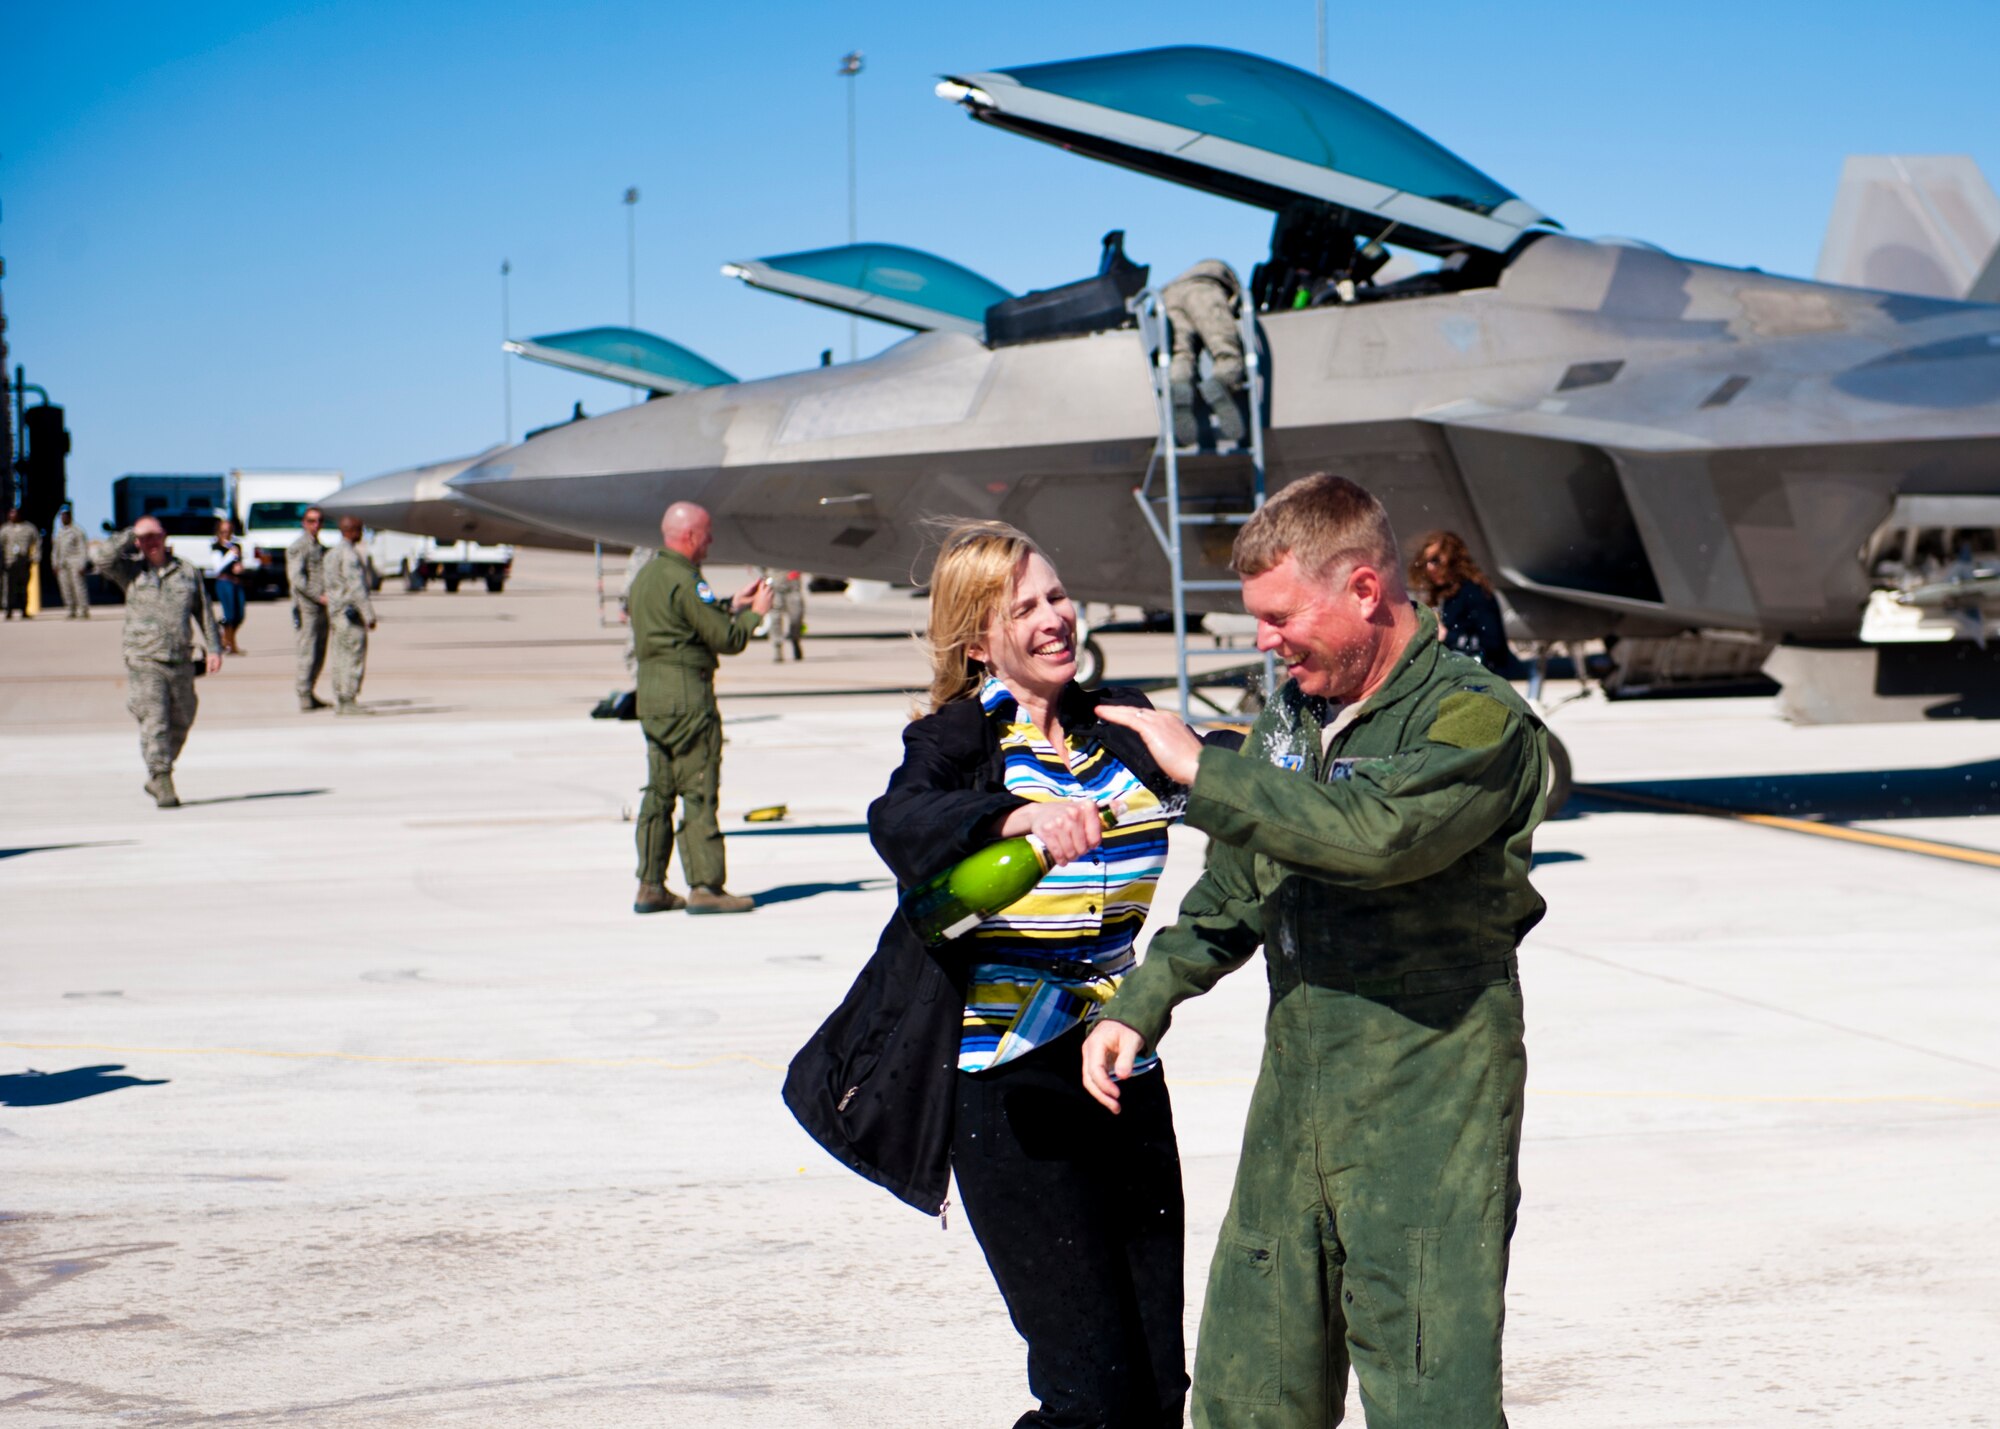 Colonel Andrew Croft, 49th Wing commander, celebrates with his wife, Vicki Croft, after his final flight in the F-22 Raptor at Holloman Ai Force Base, N.M., Feb. 20. The 7th Fighter Squadron and members of the Holloman community celebrated this sortie before the F-22s depart for Tyndall Air Force Base, Fla., in early April. (U.S. Air Force photo by Airman 1st Class Daniel Liddicoet/Released)